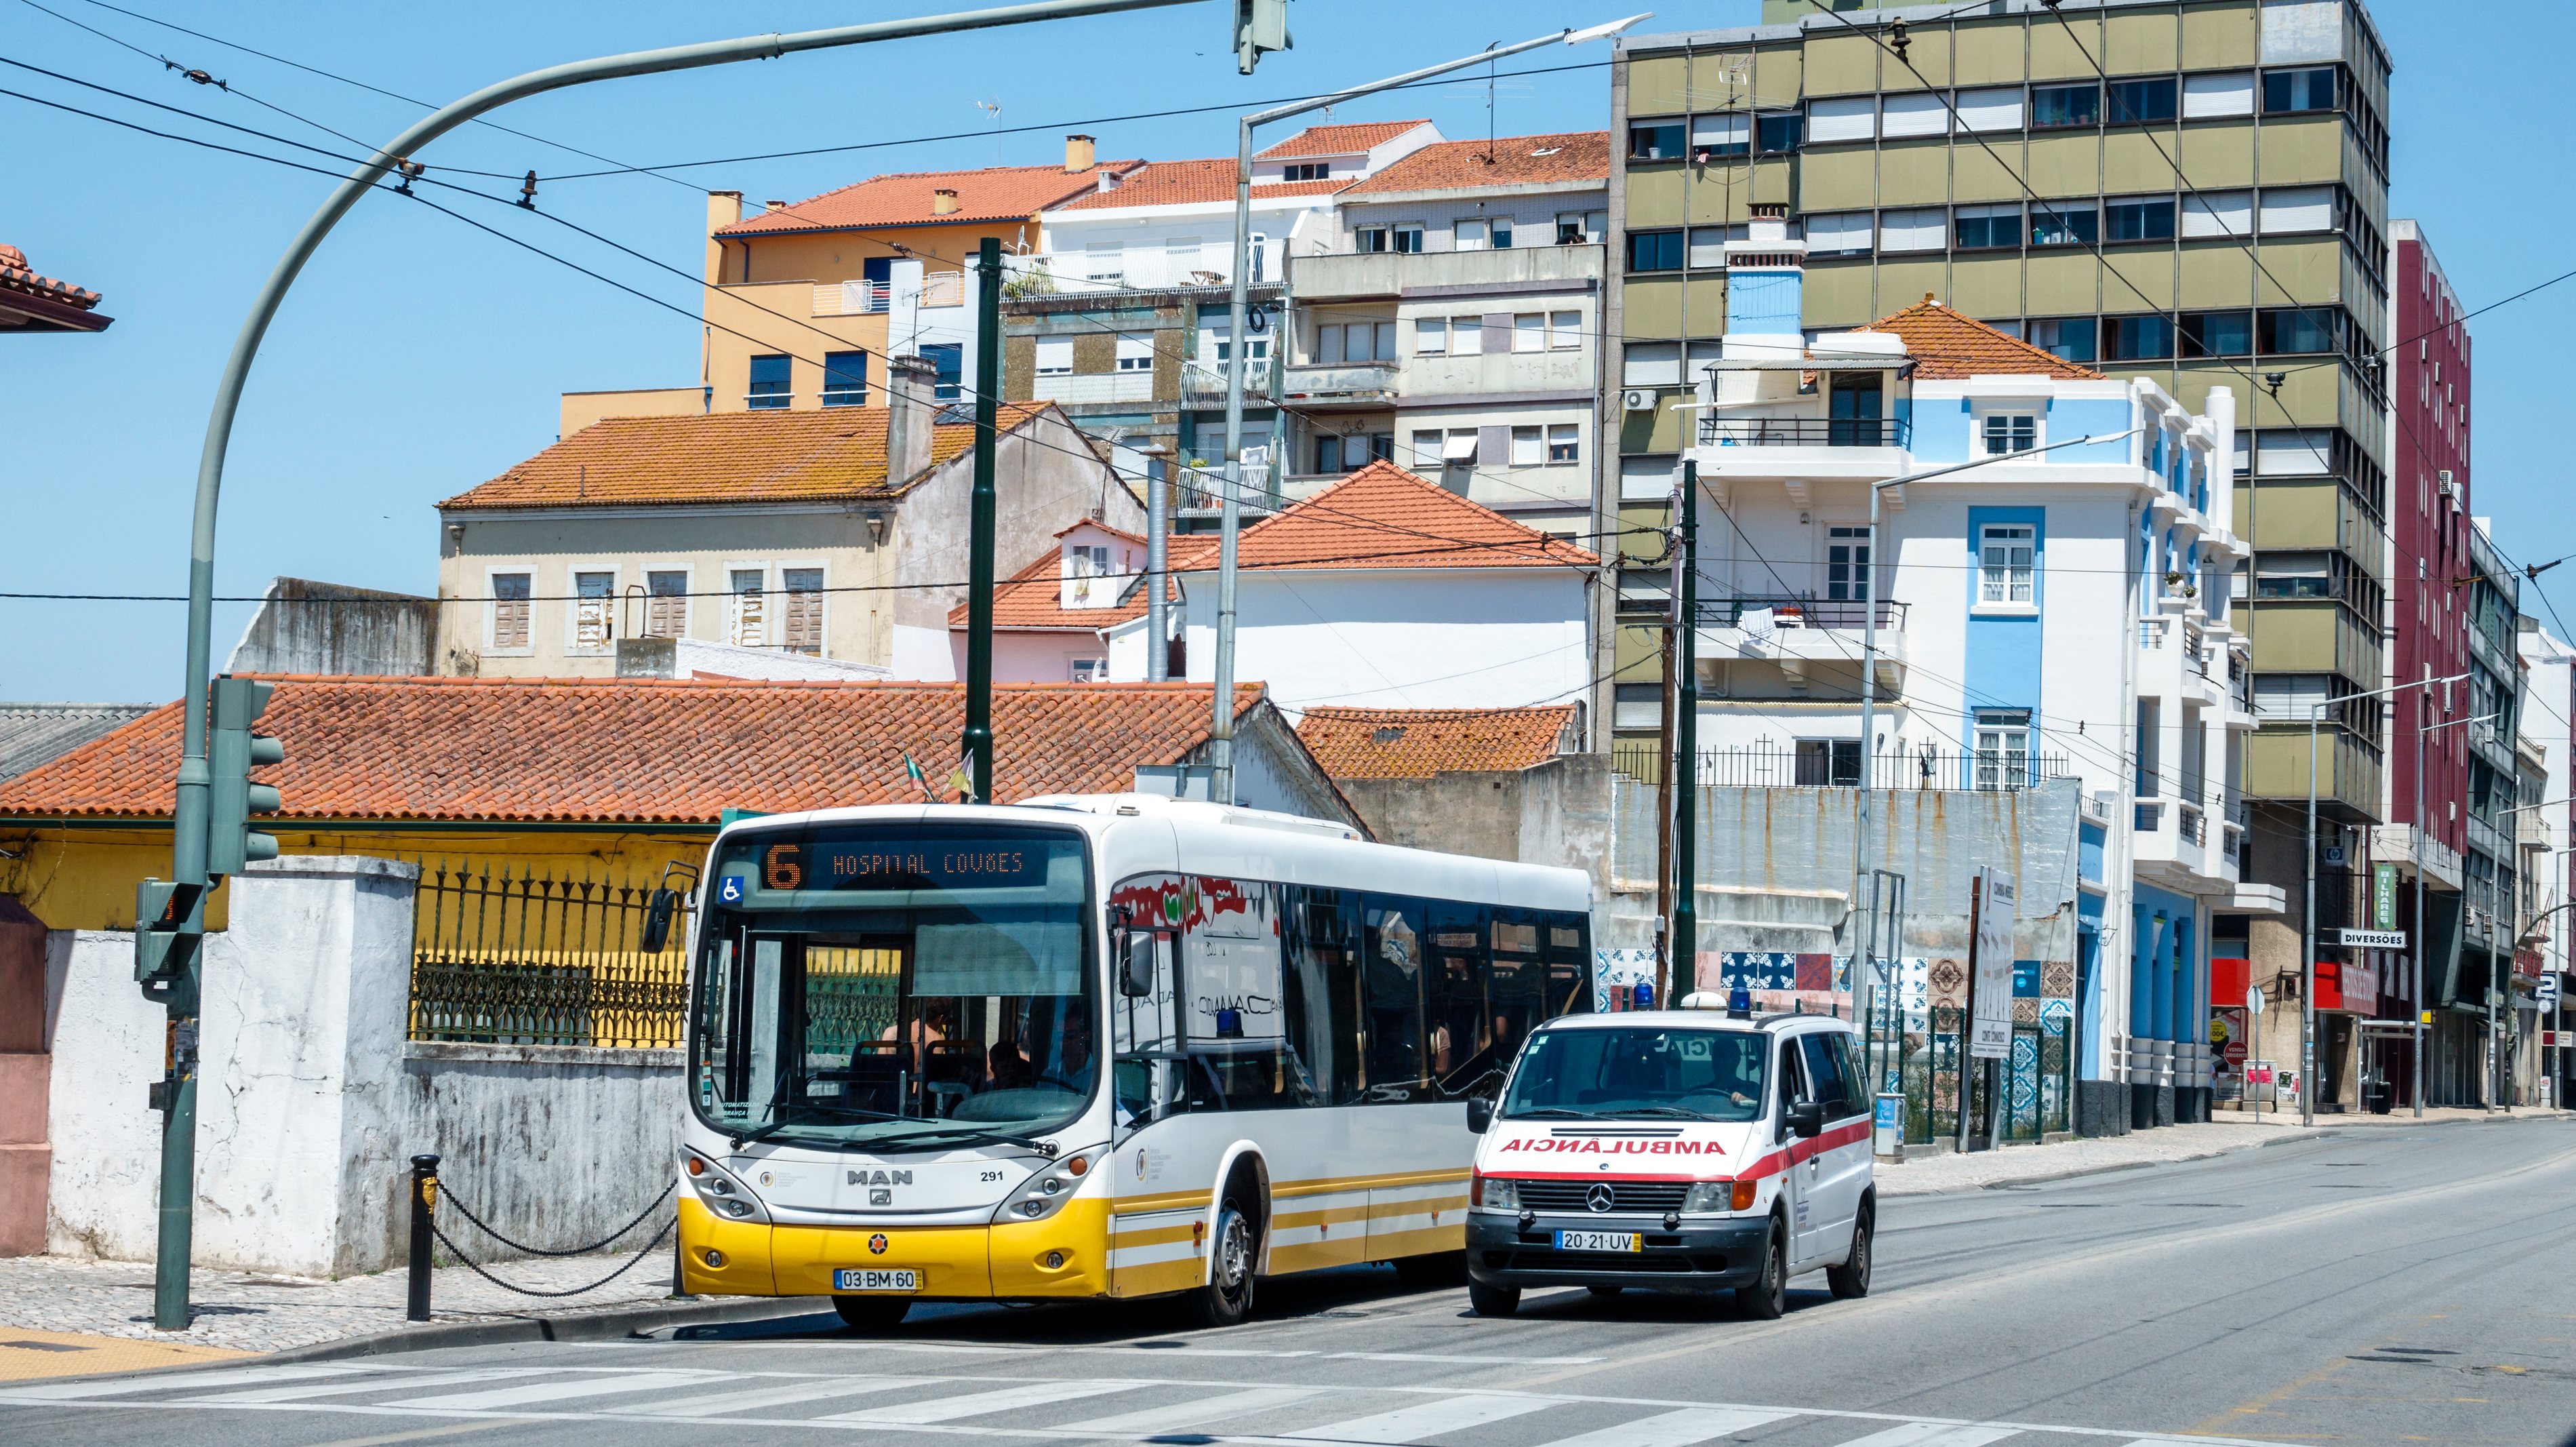 Portugal, Coimbra, Avenida Fernao de Magalhaes, intersection with bus and ambulance